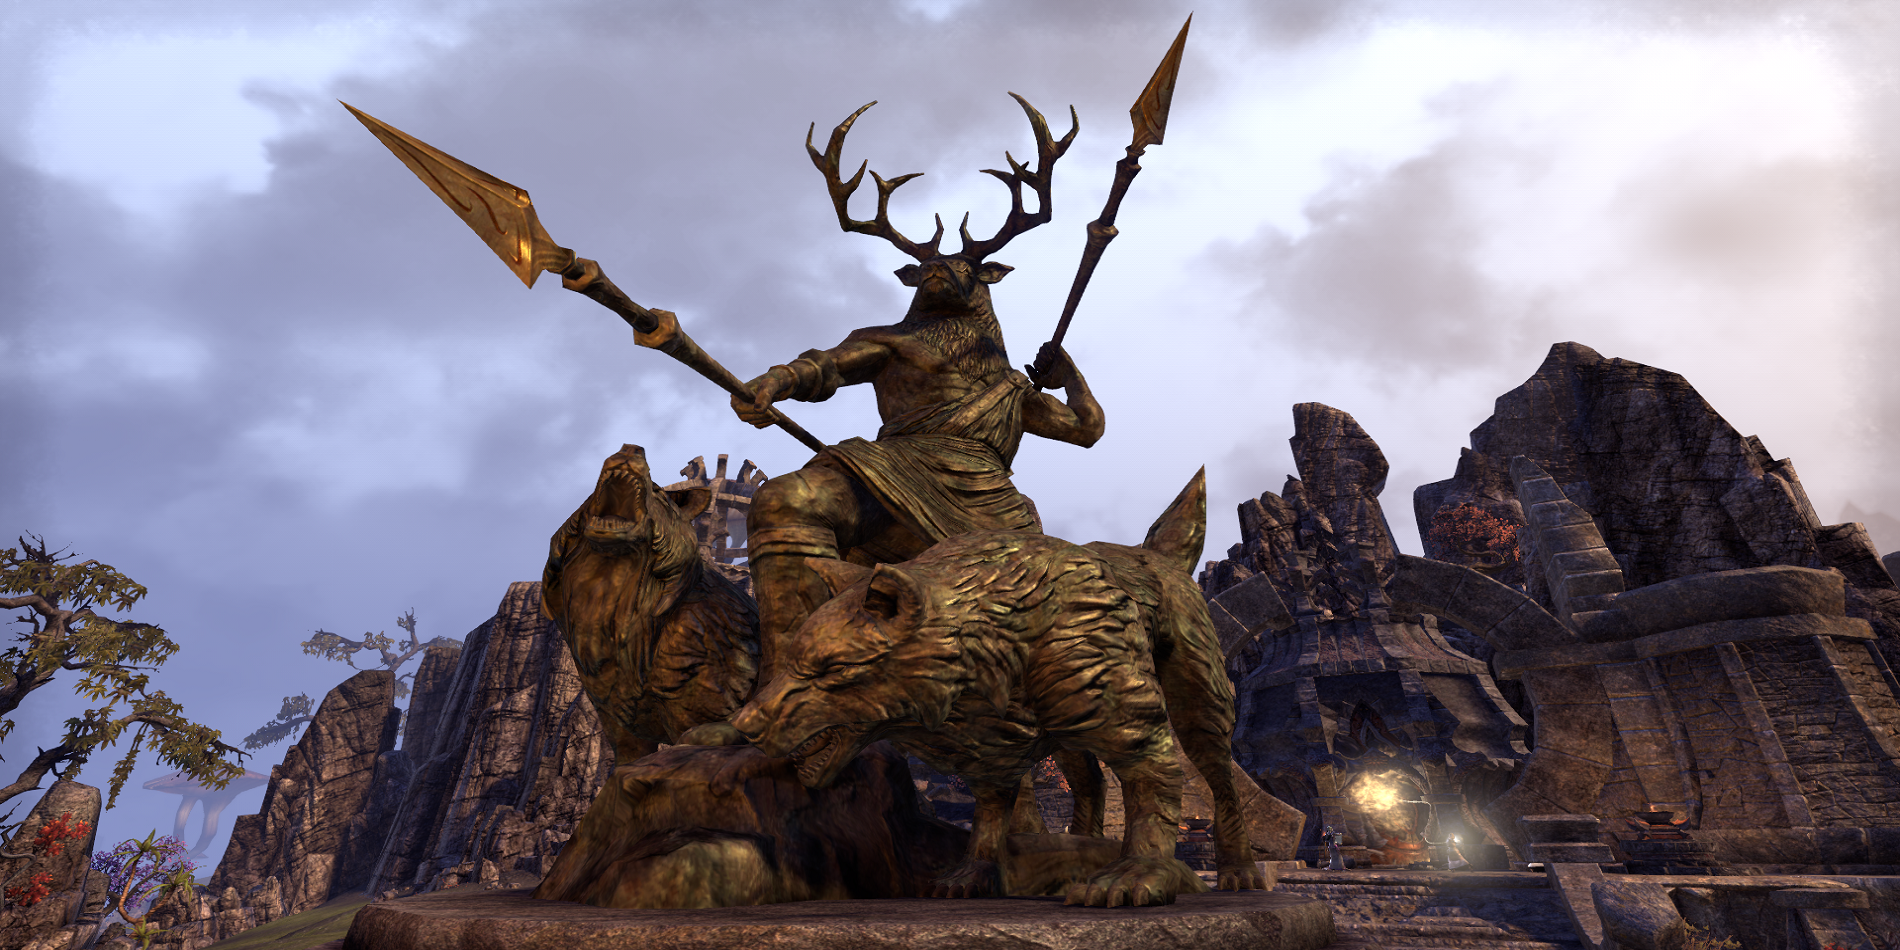 Elder Scrolls Statue of Hircine Wielding Two Spears Flanked by Two Wolves Daytime